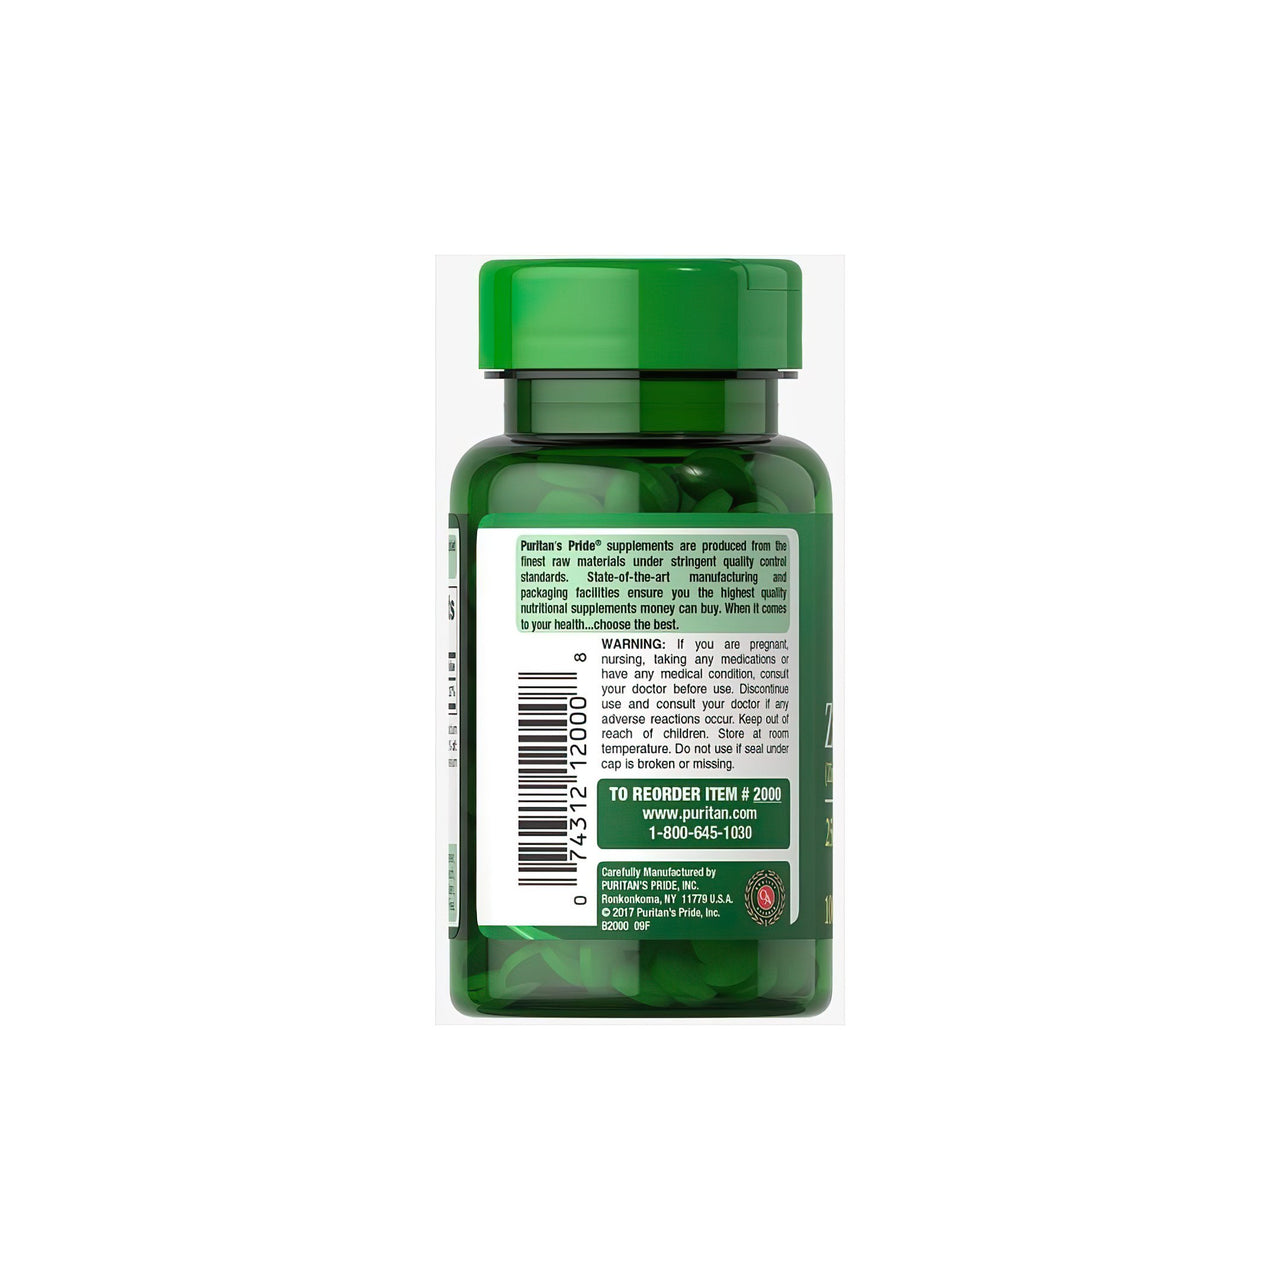 A bottle of Puritan's Pride Zinc Gluconate 25 mg 100 tablets, rich in health-promoting nutrients, on a white background.